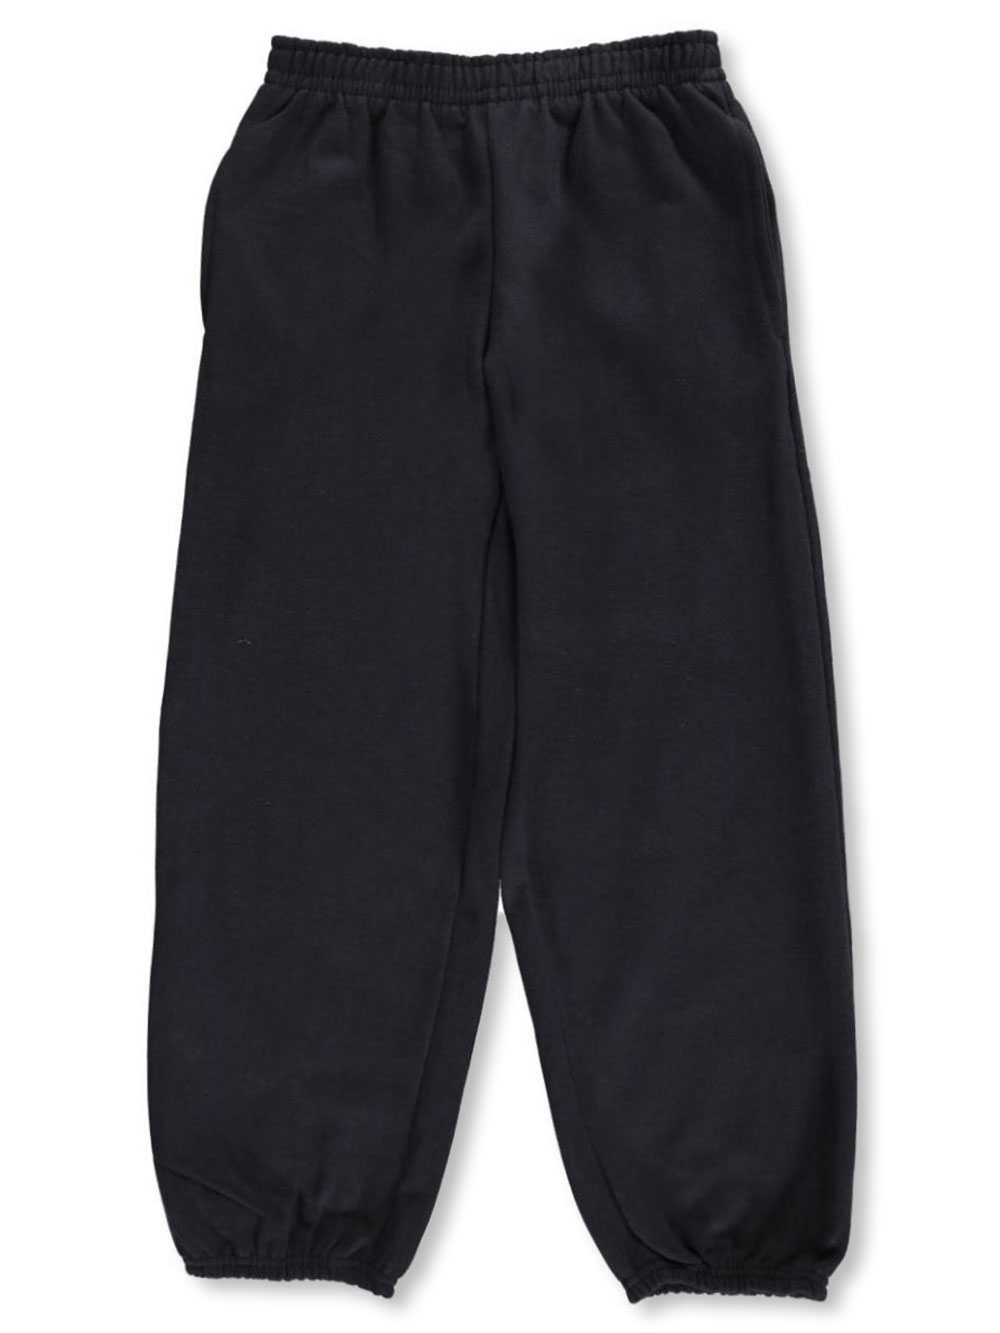 Size 12-14 Sweatpants for Boys